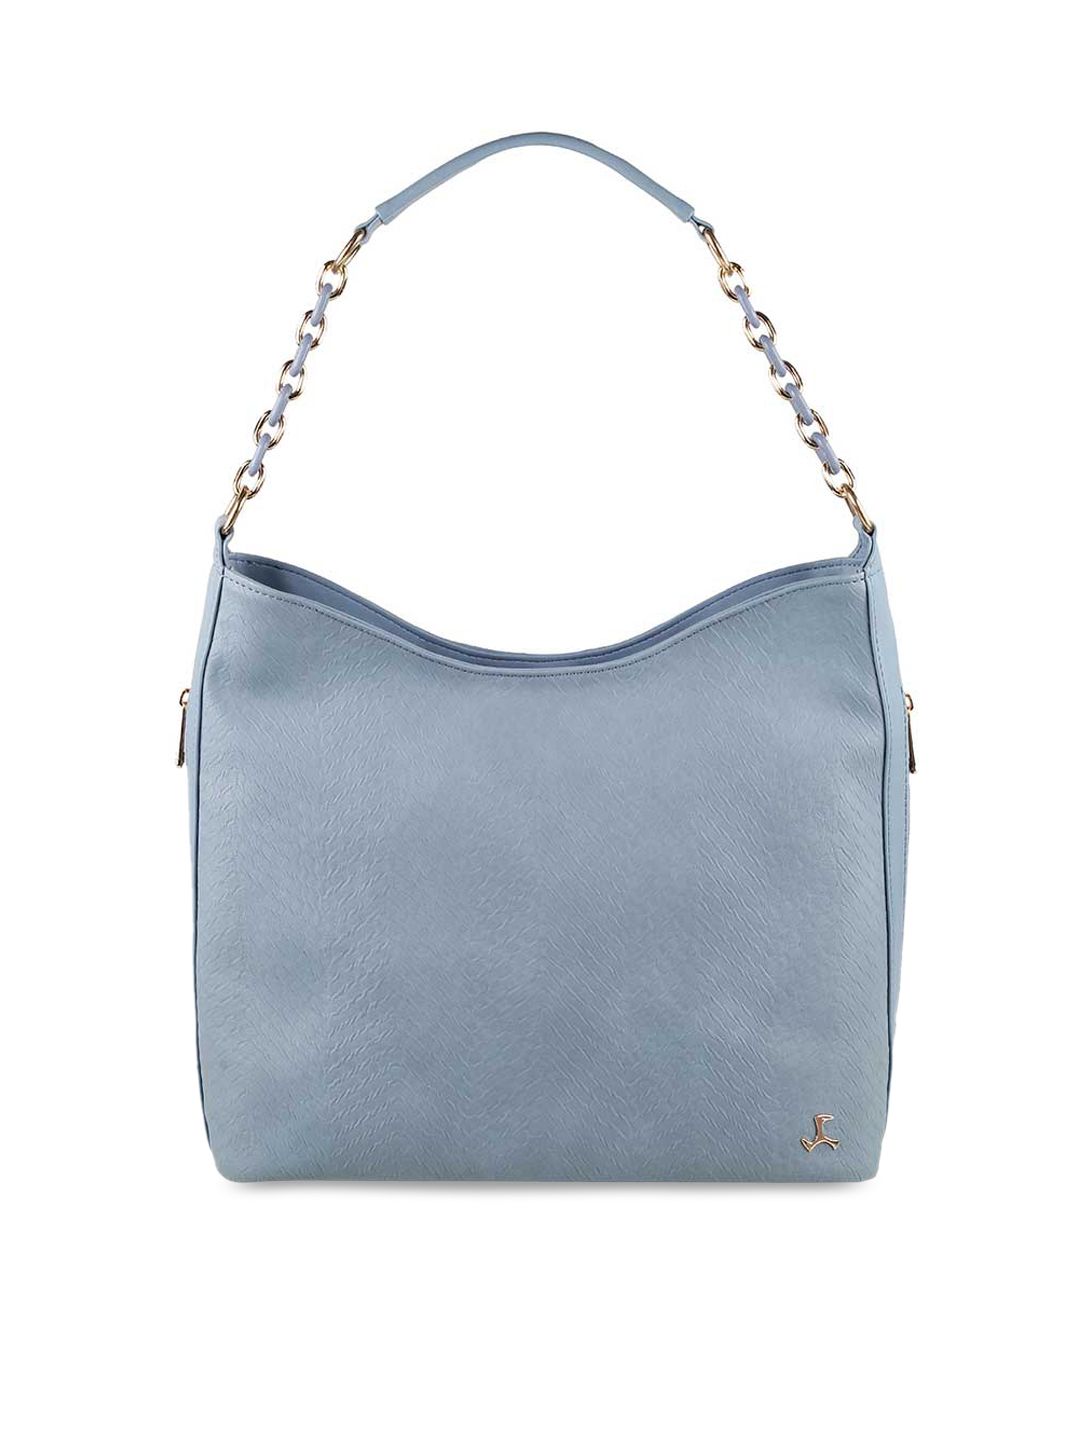 Mochi Blue Structured Hobo Bag Price in India